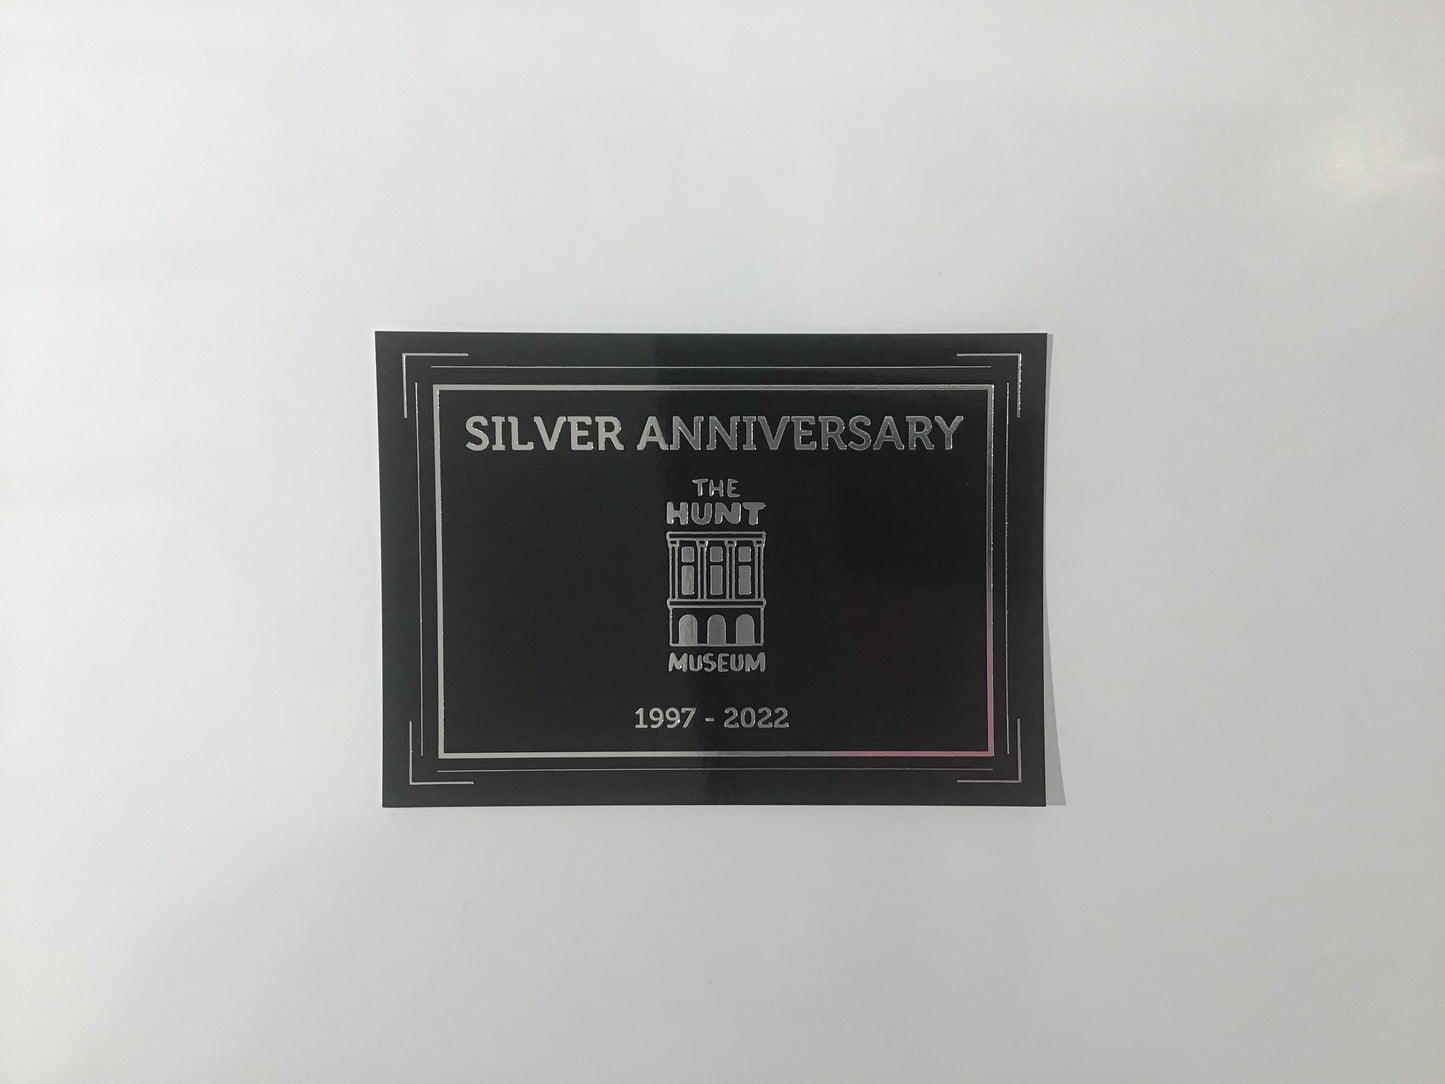 Silver Anniversary Postcards Celebrating 25 Of The Hunt Museum